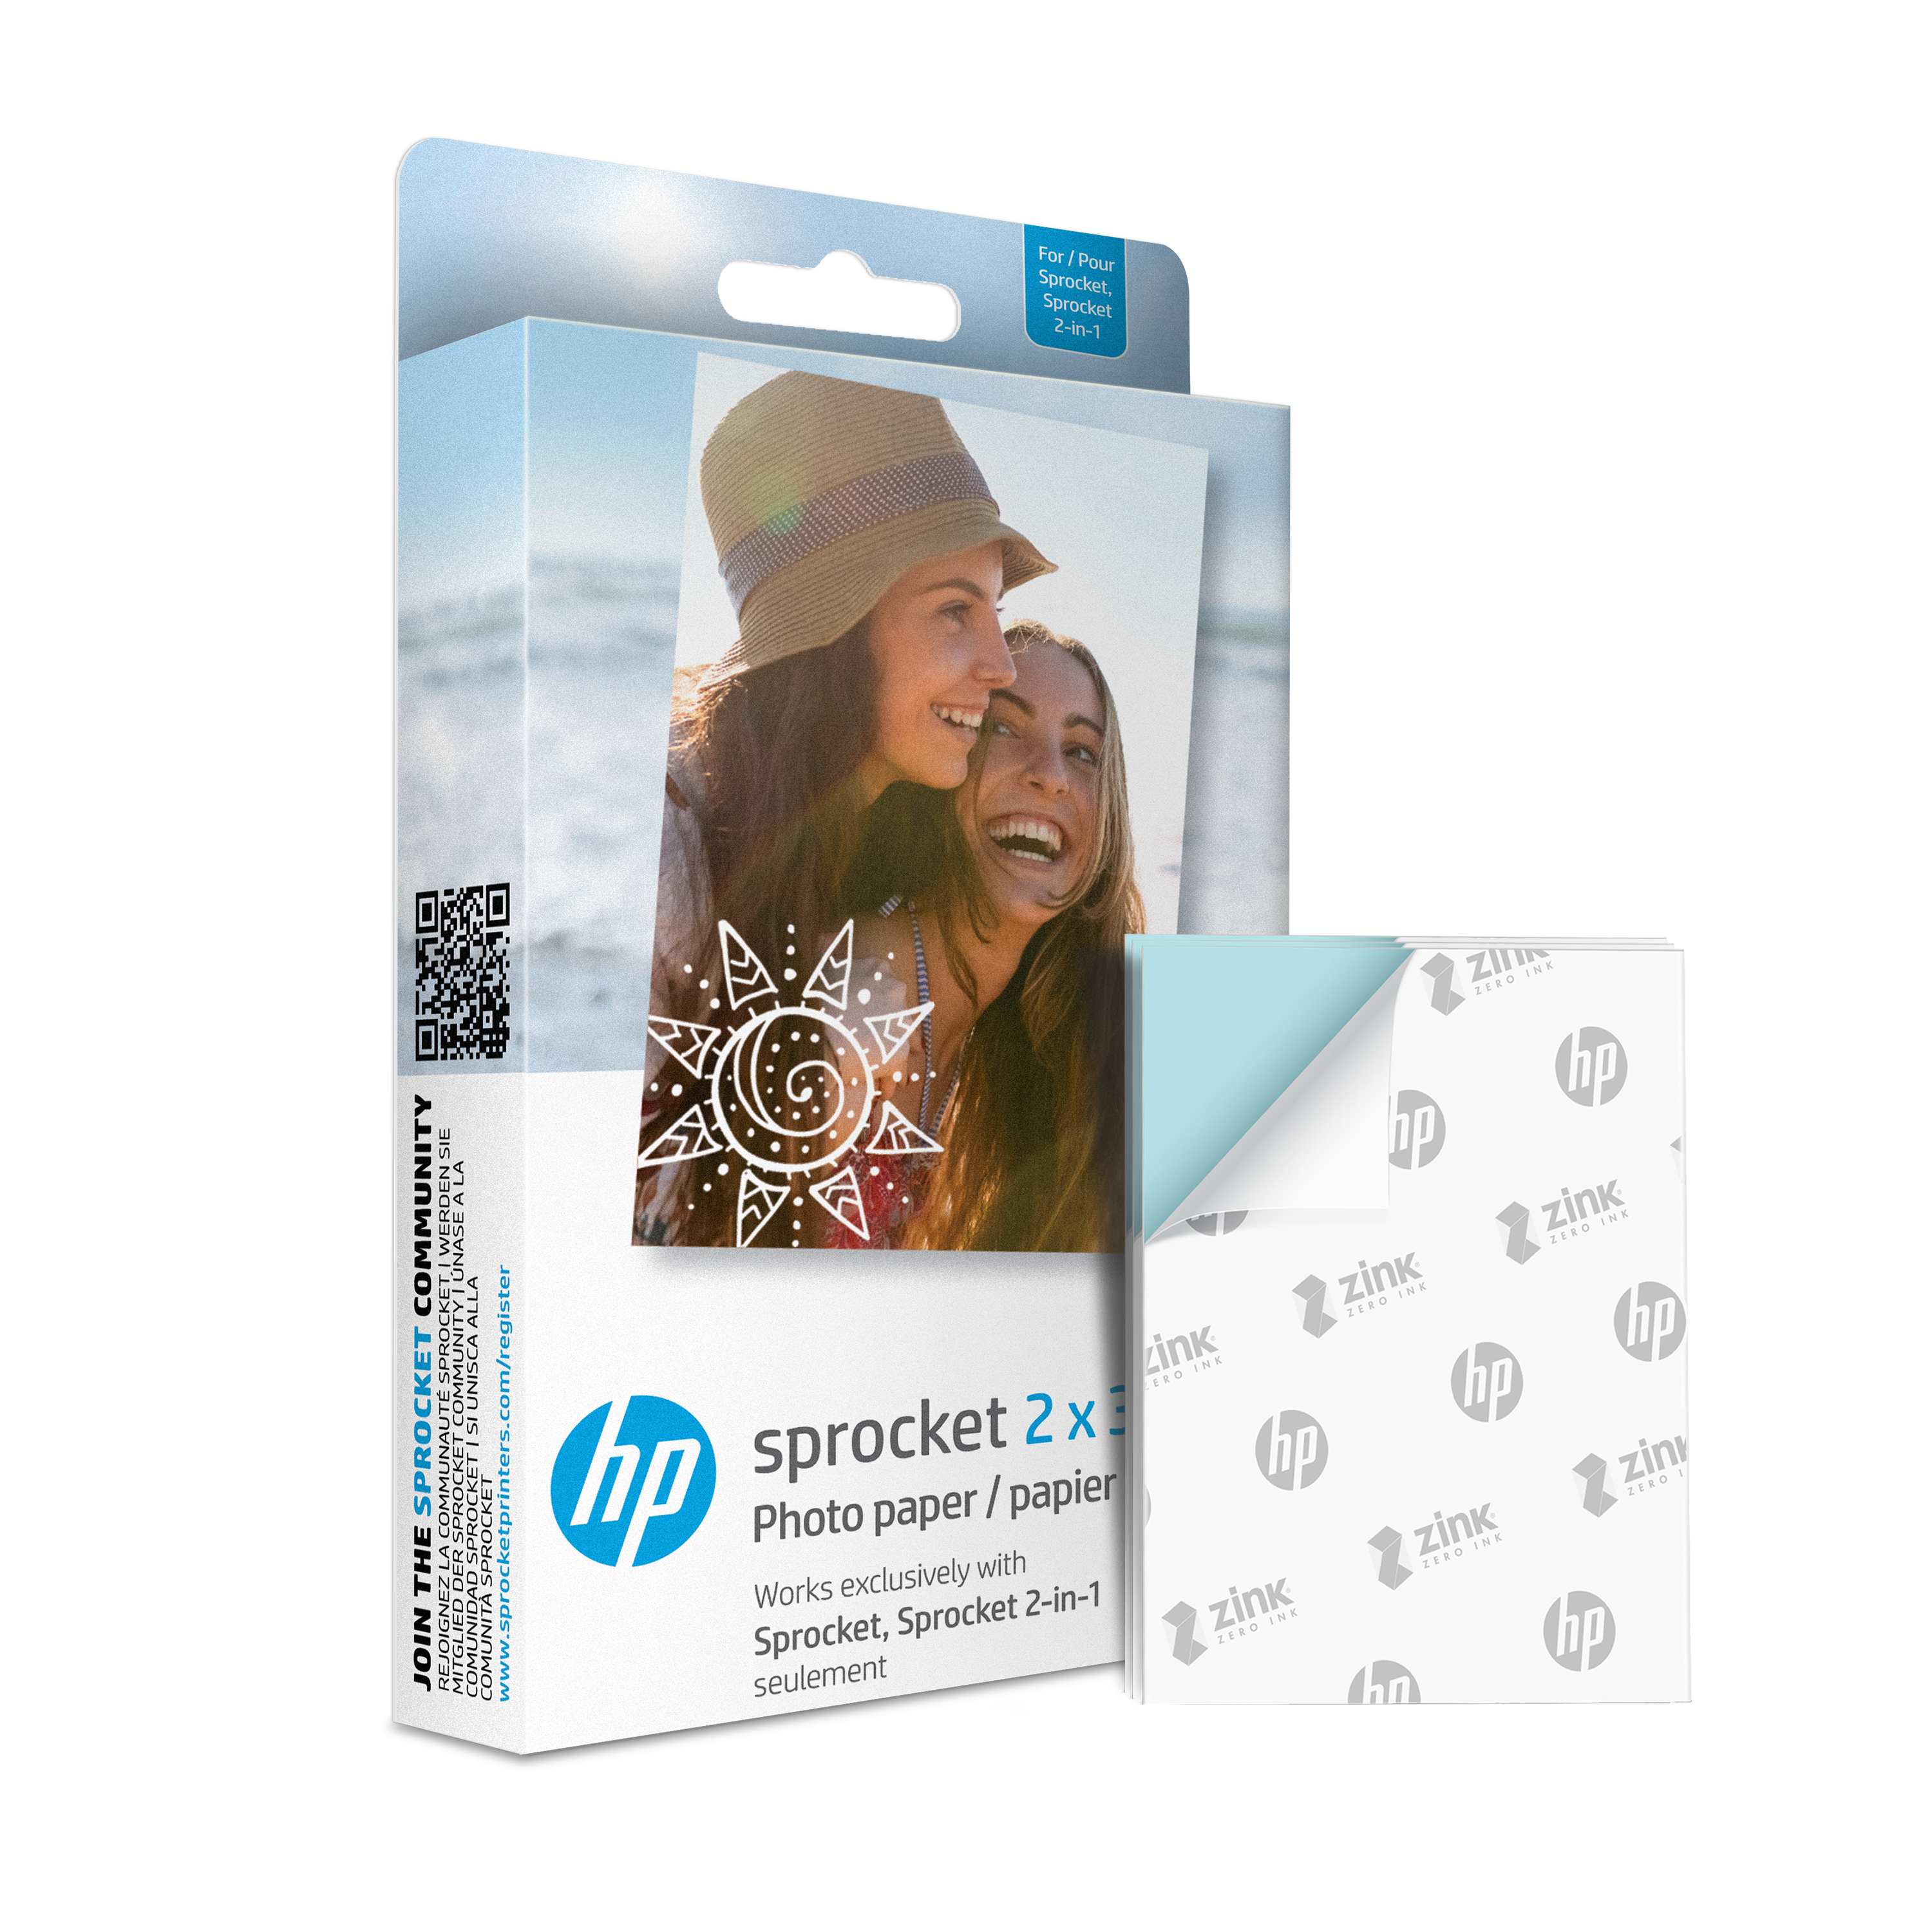 ZINKTM Photo Paper Pack (50 Sheets) 